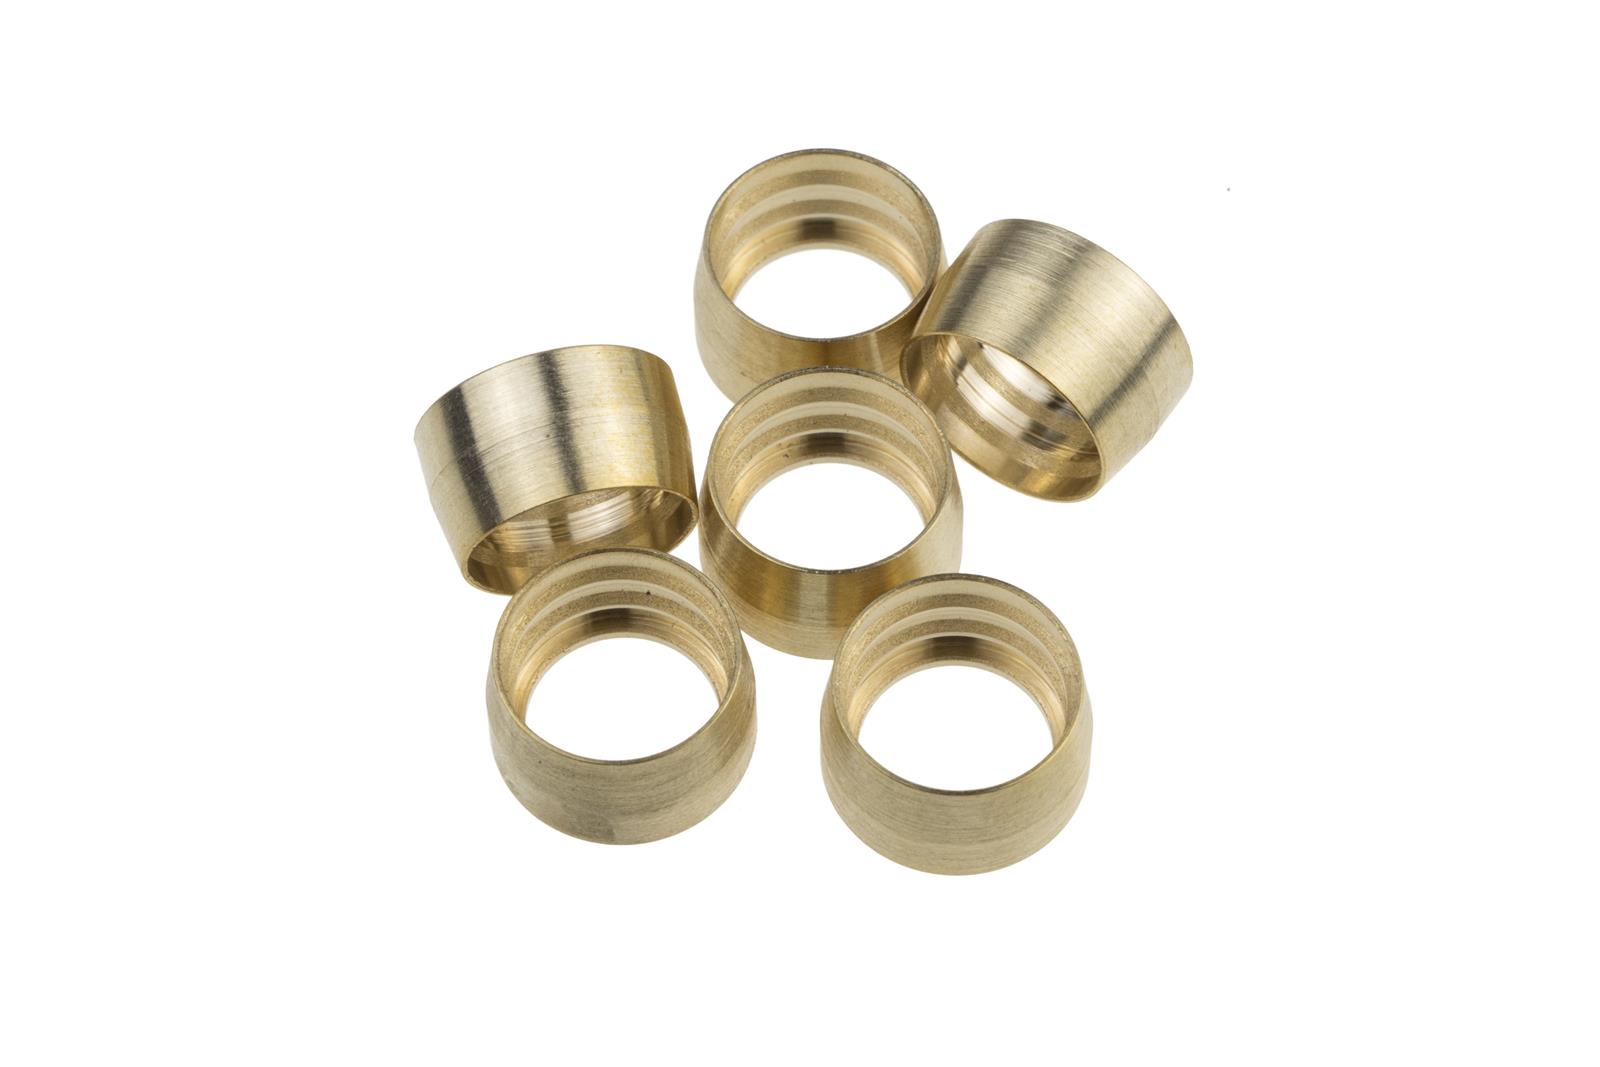 Redhorse Performance 1200-04-0 Brass Replacement Ferrules for -04  1200 Series PTFE Hose Ends - 6pcs/pkg